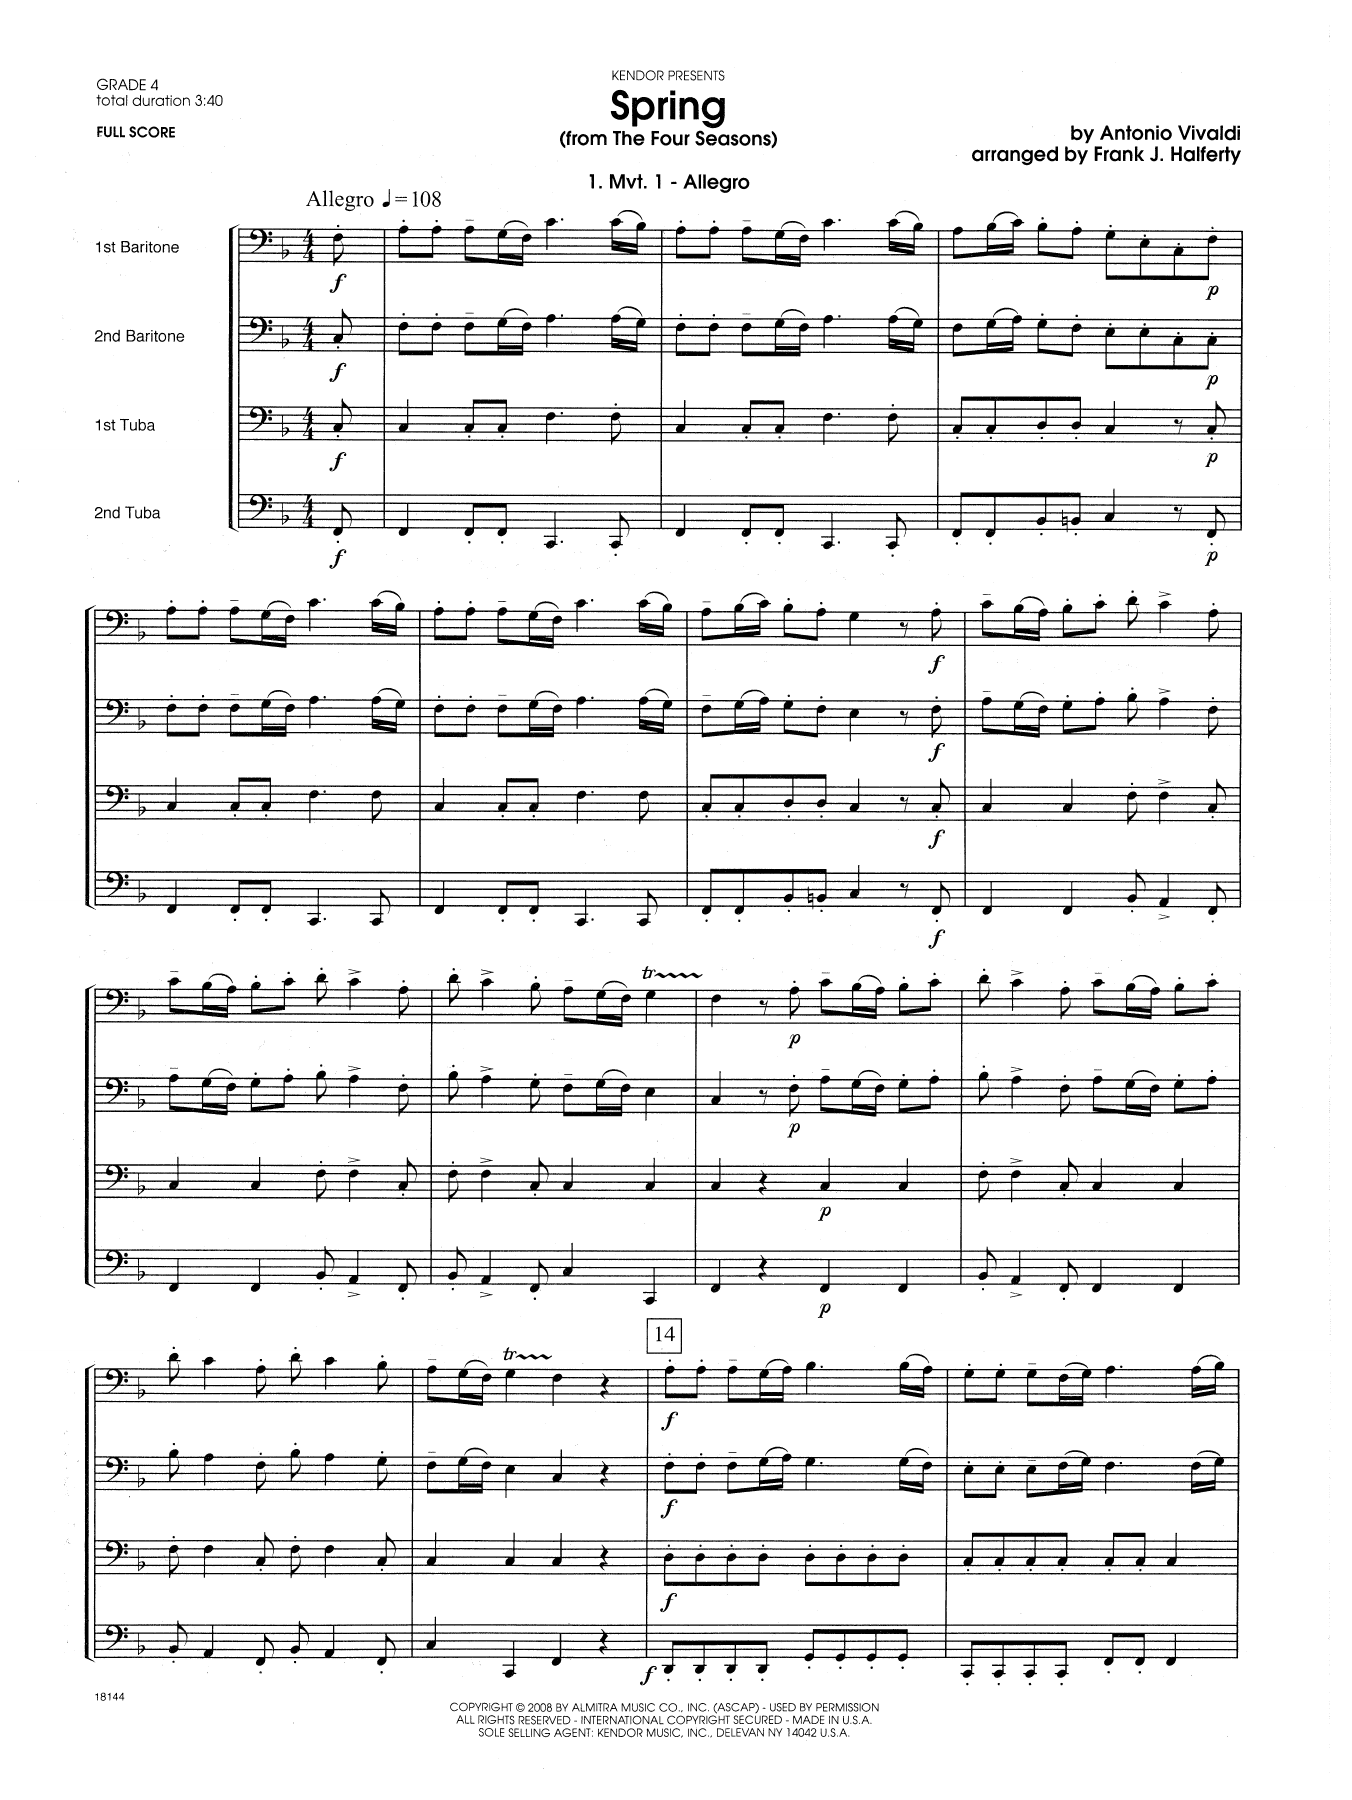 Frank J. Halferty Spring (from The Four Seasons) - Full Score sheet music notes and chords. Download Printable PDF.